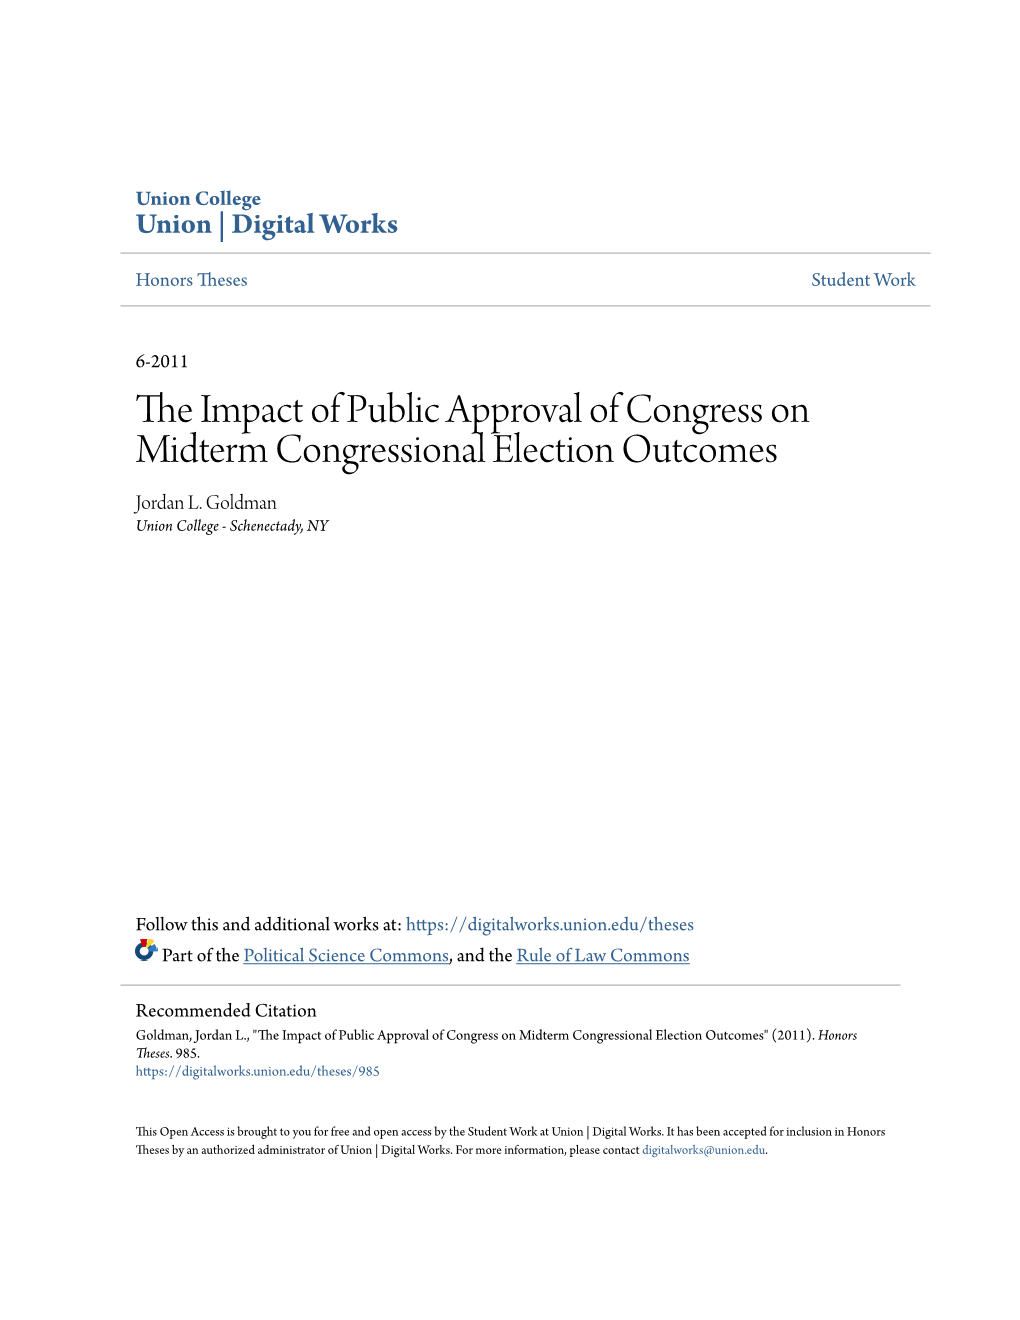 The Impact of Public Approval of Congress on Midterm Congressional Election Outcomes